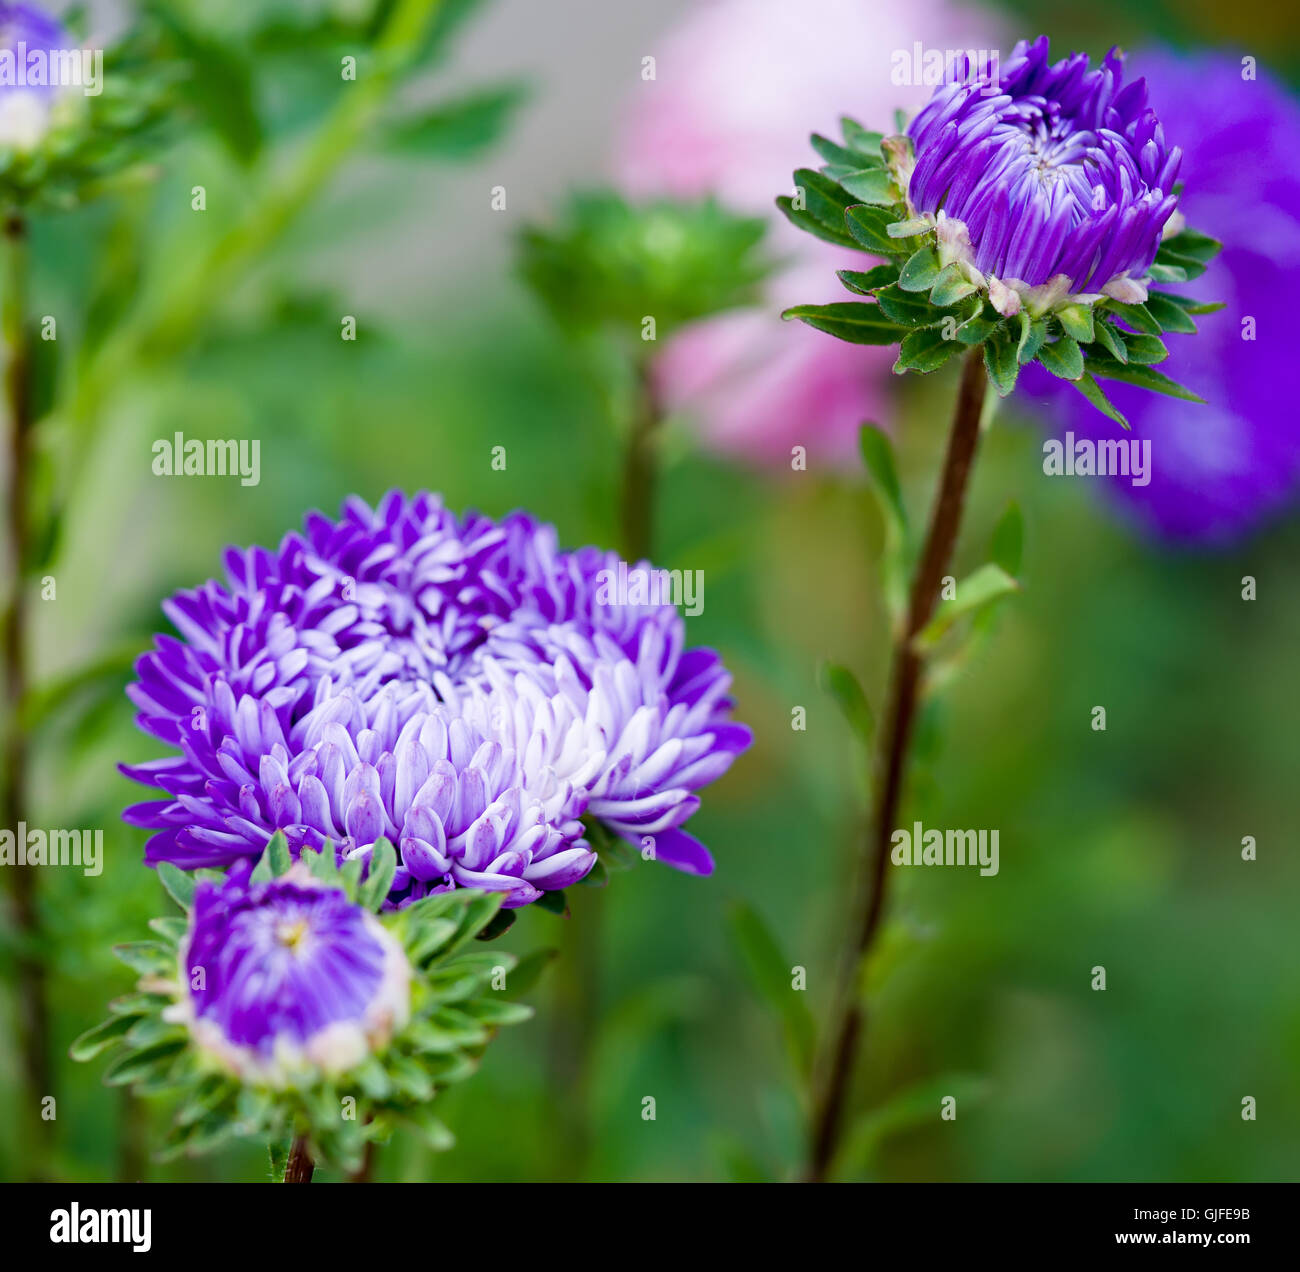 Blue asters in nature, close-up Stock Photo